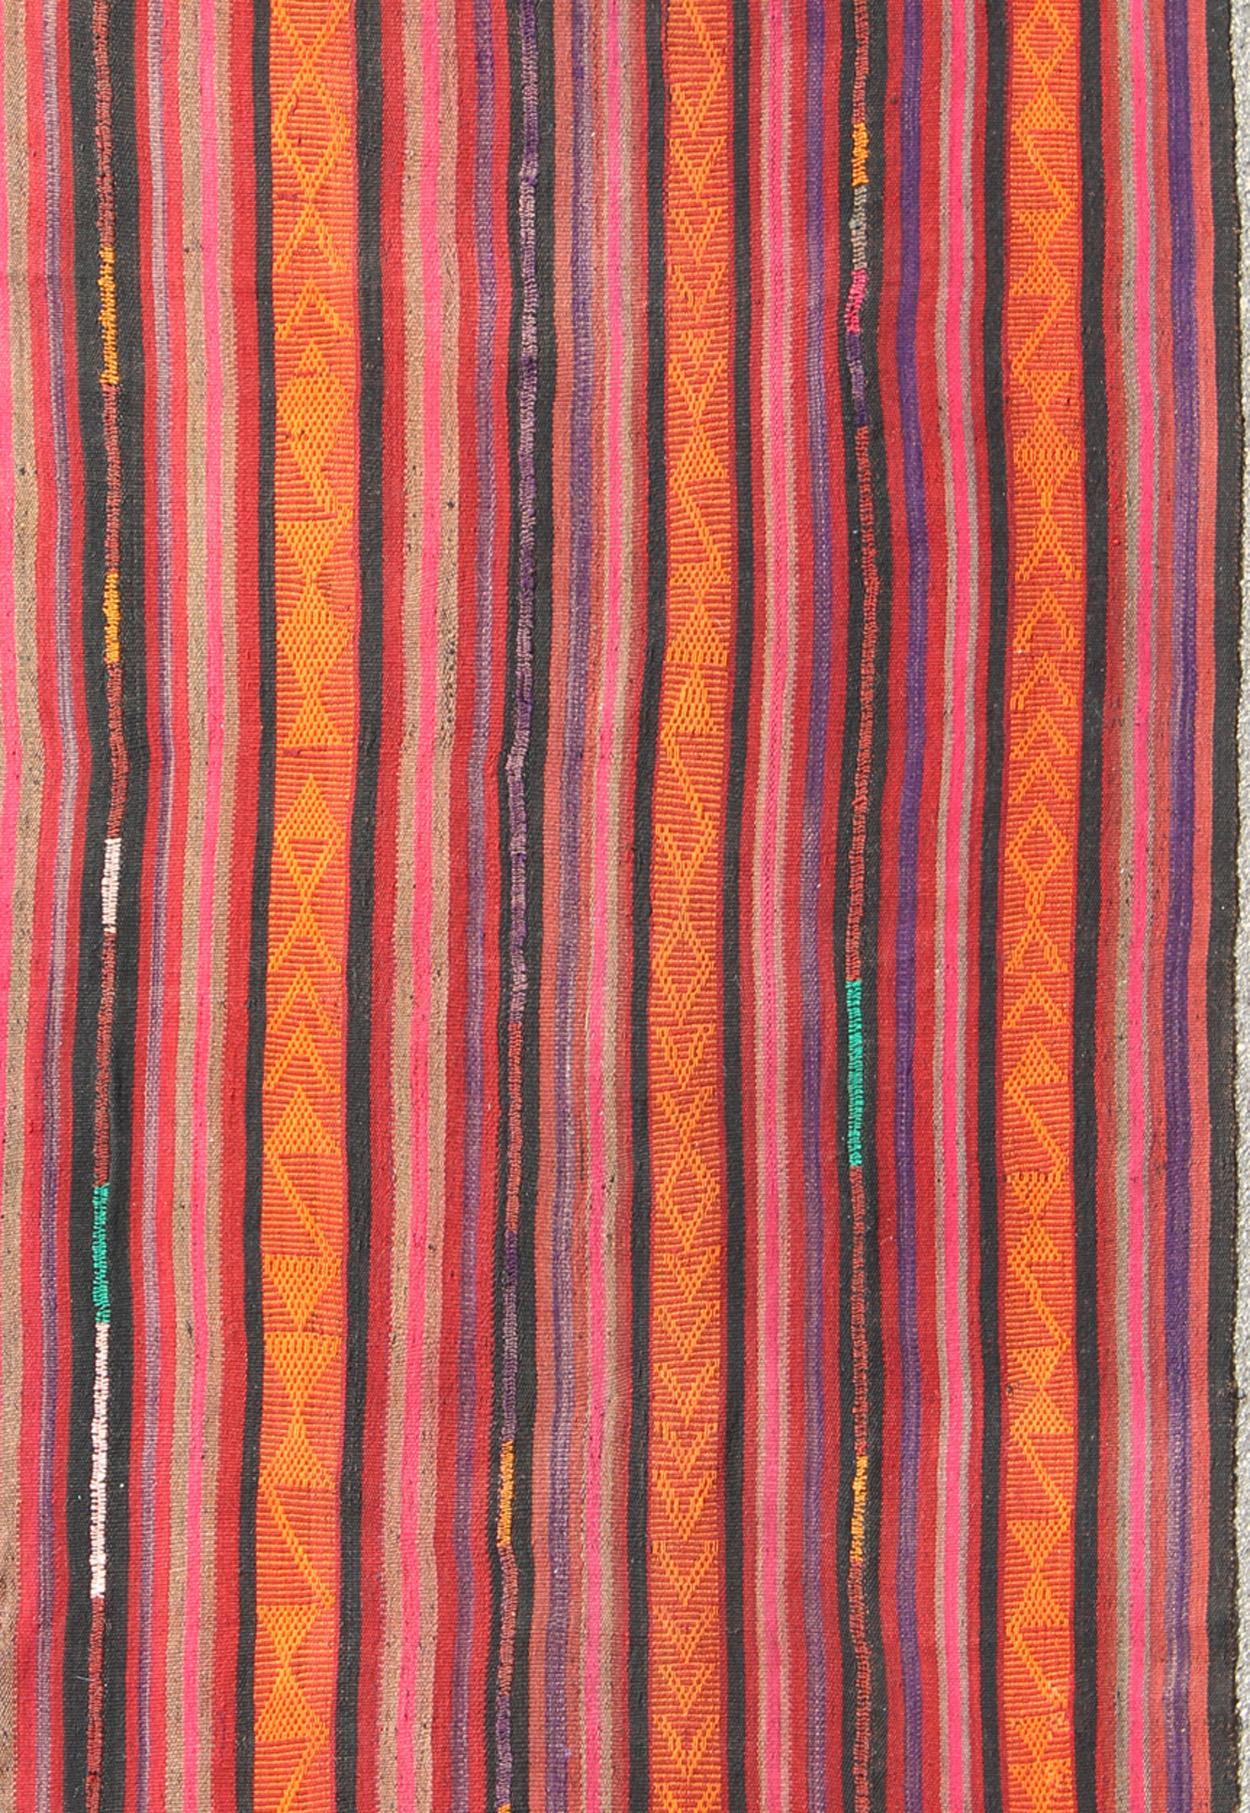 Kilim vintage rug from Turkey with striped pattern, rug Tu-Ned-4733, country of origin / type: Turkey / Kilim, circa 1940

This tribal Kilim from Turkey bears vertical striped design.
Measures: 6'5 x 10'5.